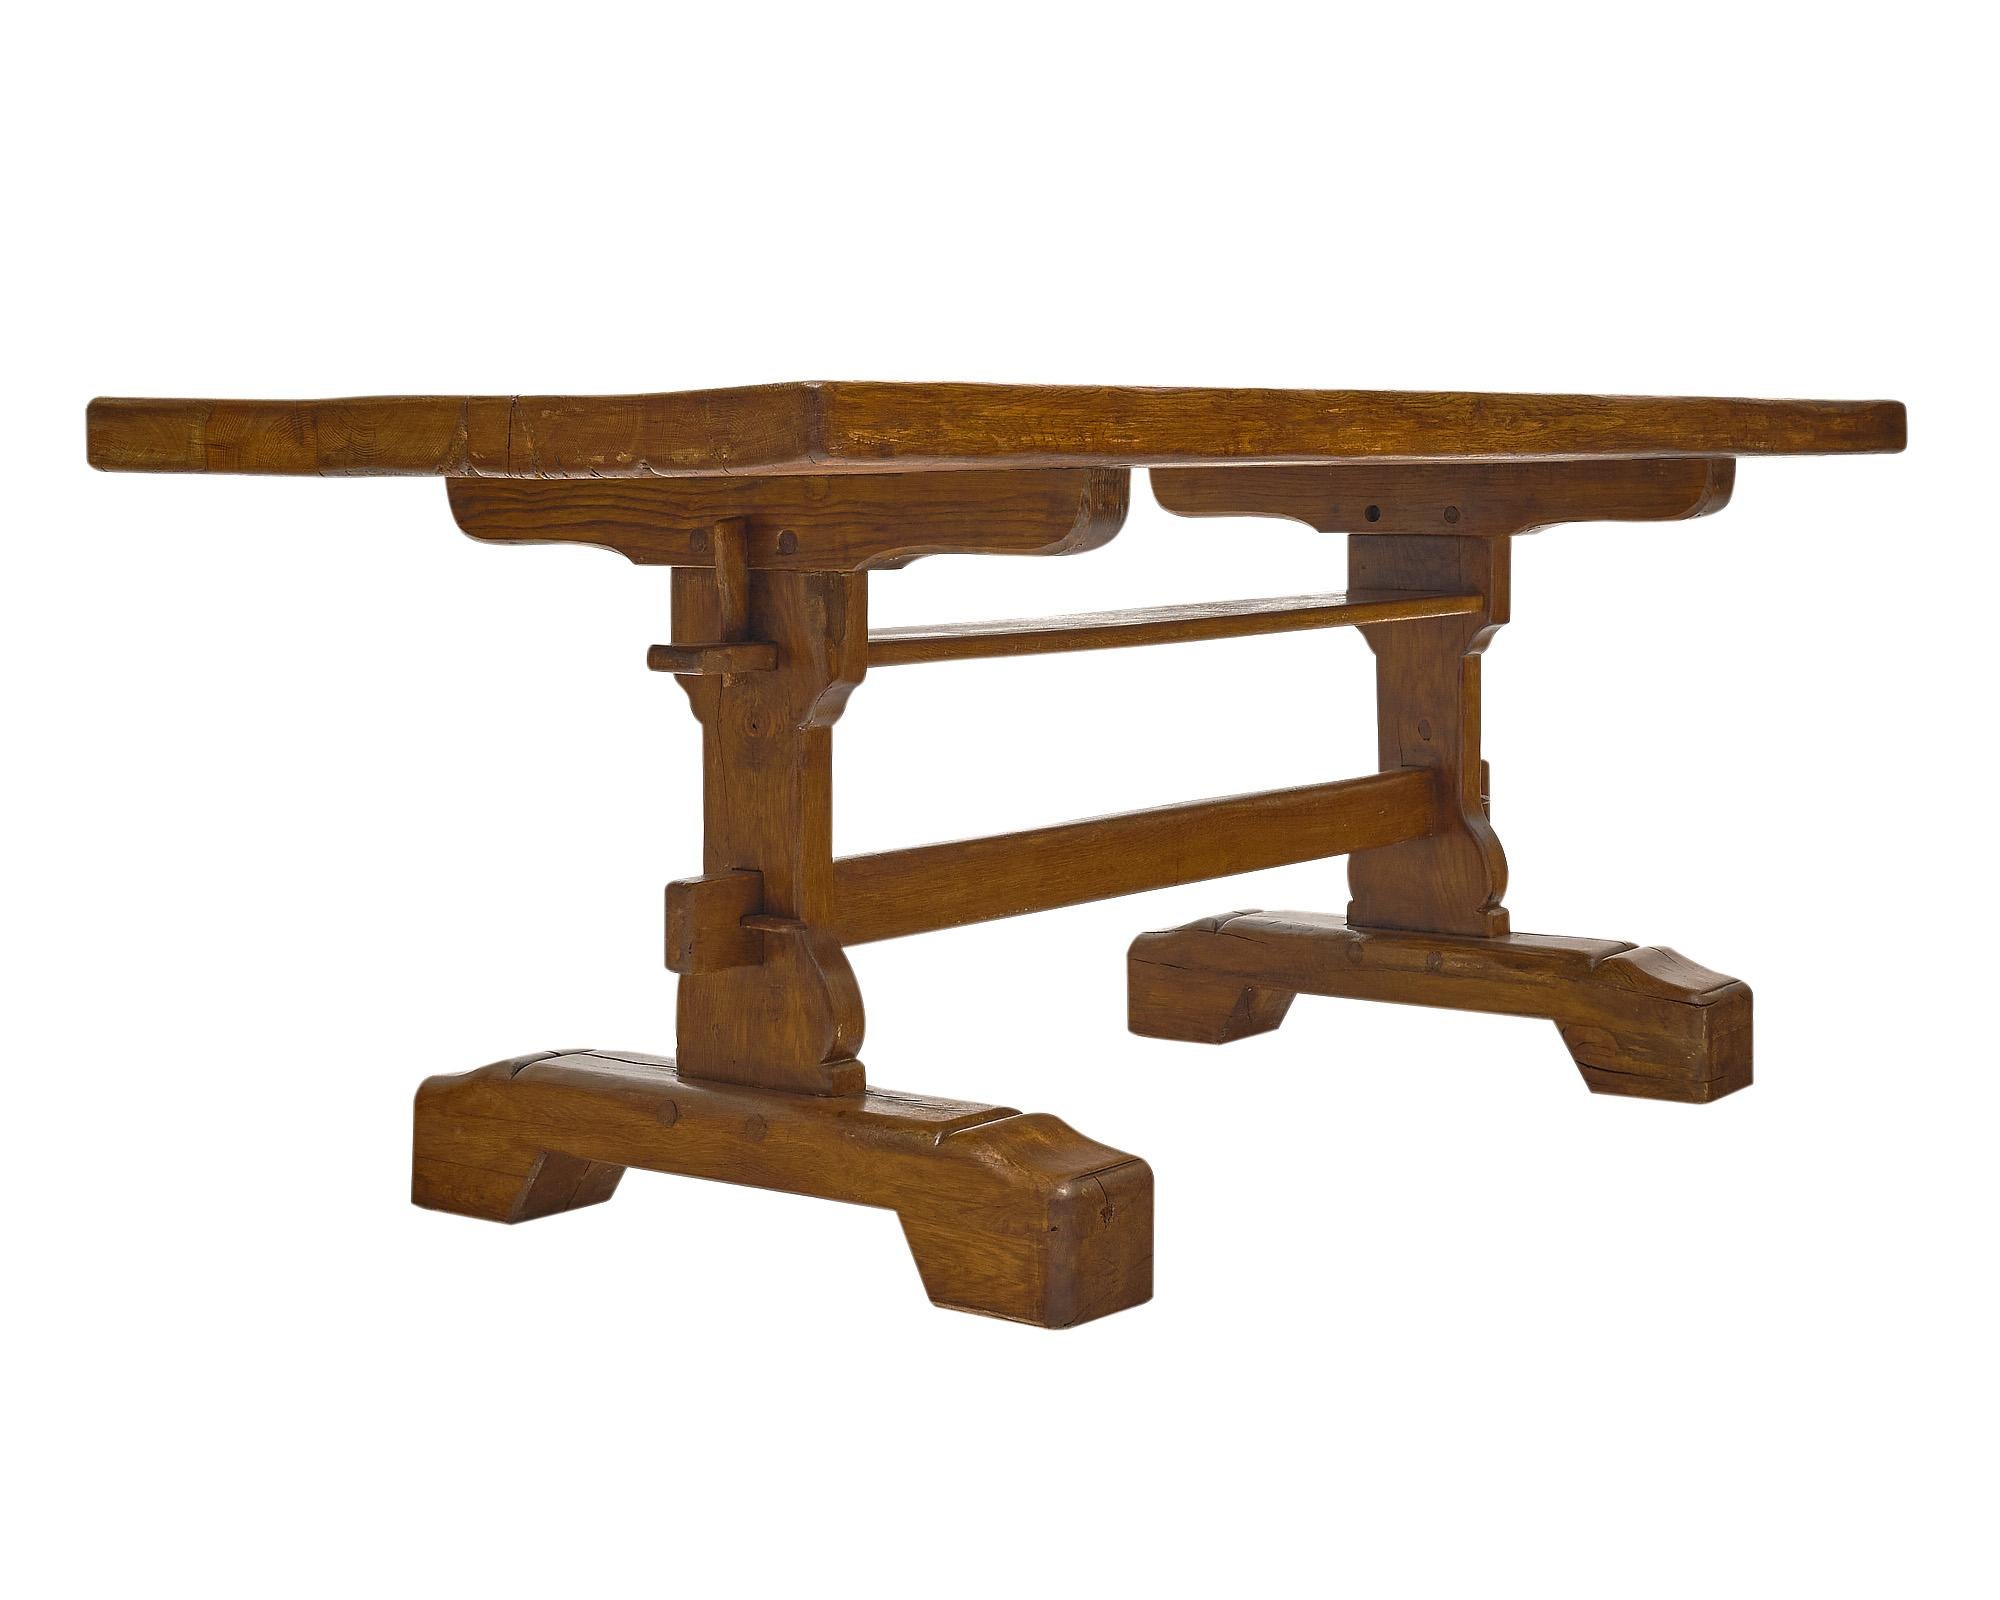 Trestle table from France handcrafted in Solid oak with a unique trestle pedestal and double stretcher. This piece has peg construction and is finished with a Carnauba wax finish. The table is from the Rhone Valley.